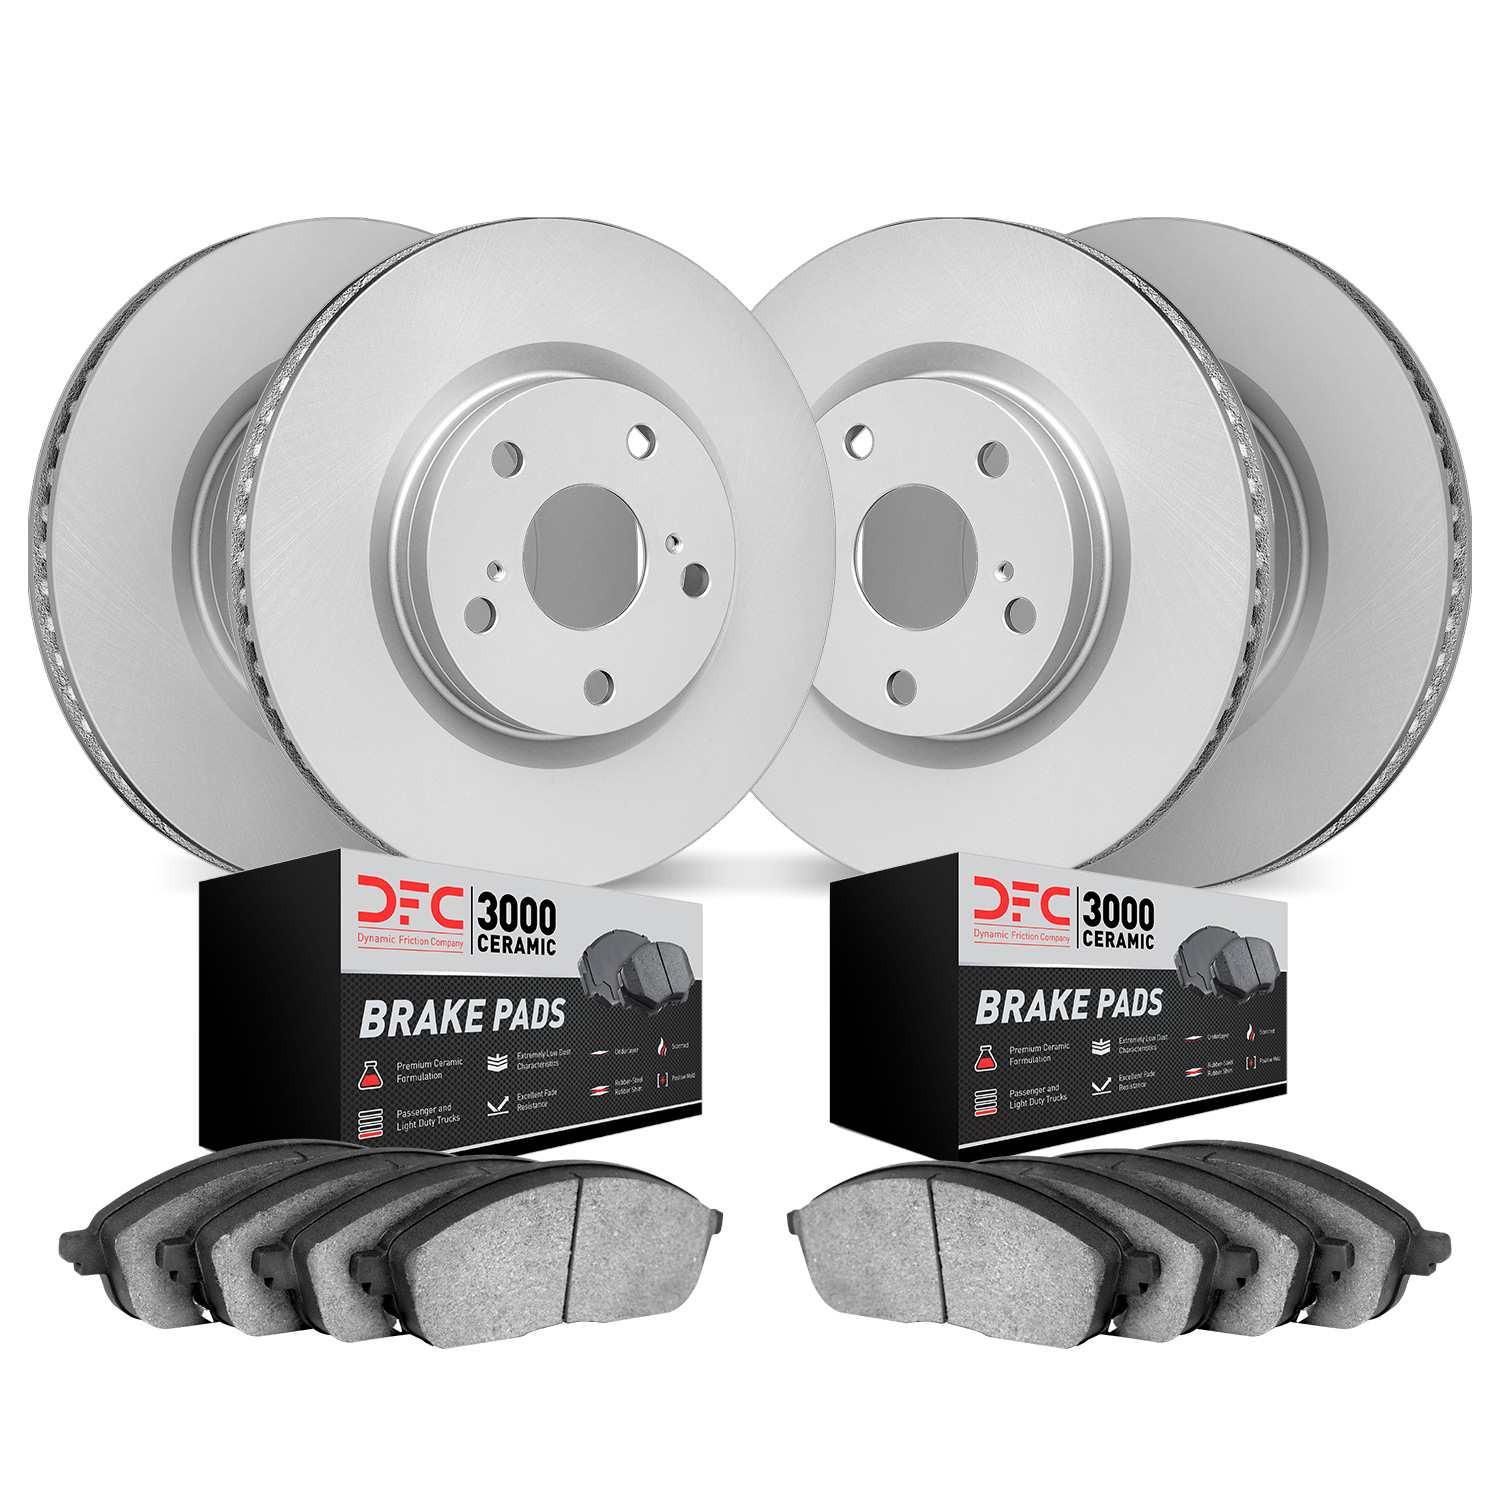 4304-31058 Geospec Brake Rotors with 3000-Series Ceramic Brake Pads Kit, 2011-2016 BMW, Position: Front and Rear